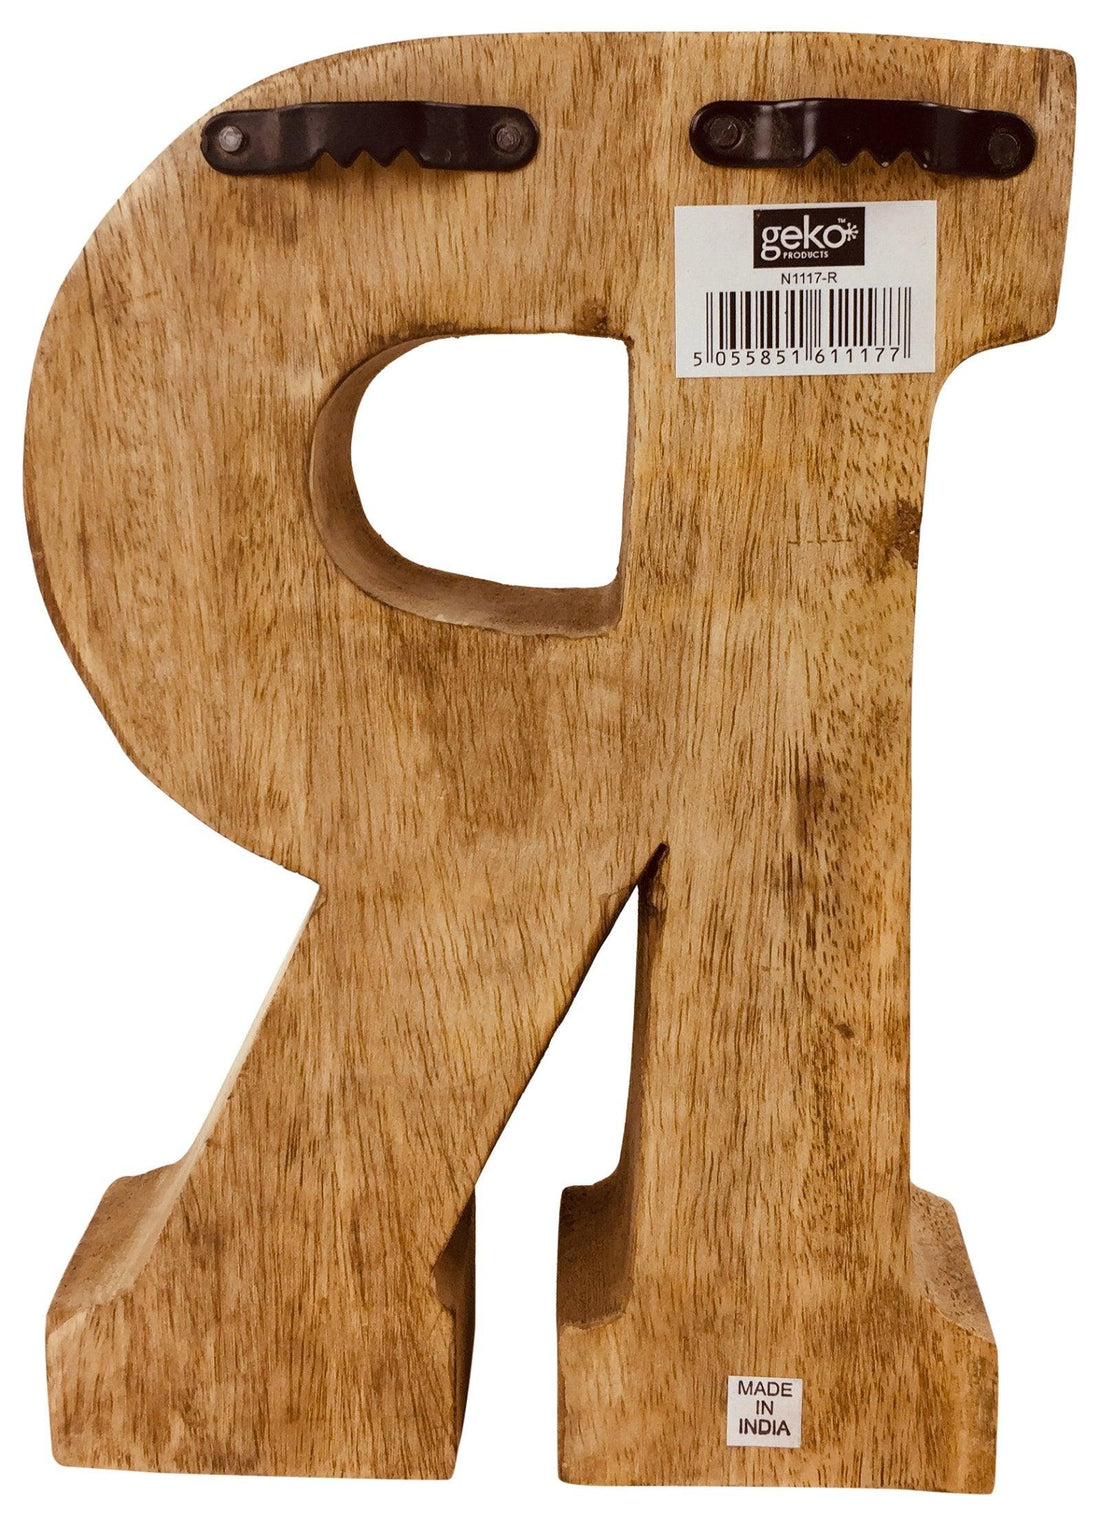 Hand Carved Wooden Embossed Letter R - £18.99 - Single Letters 